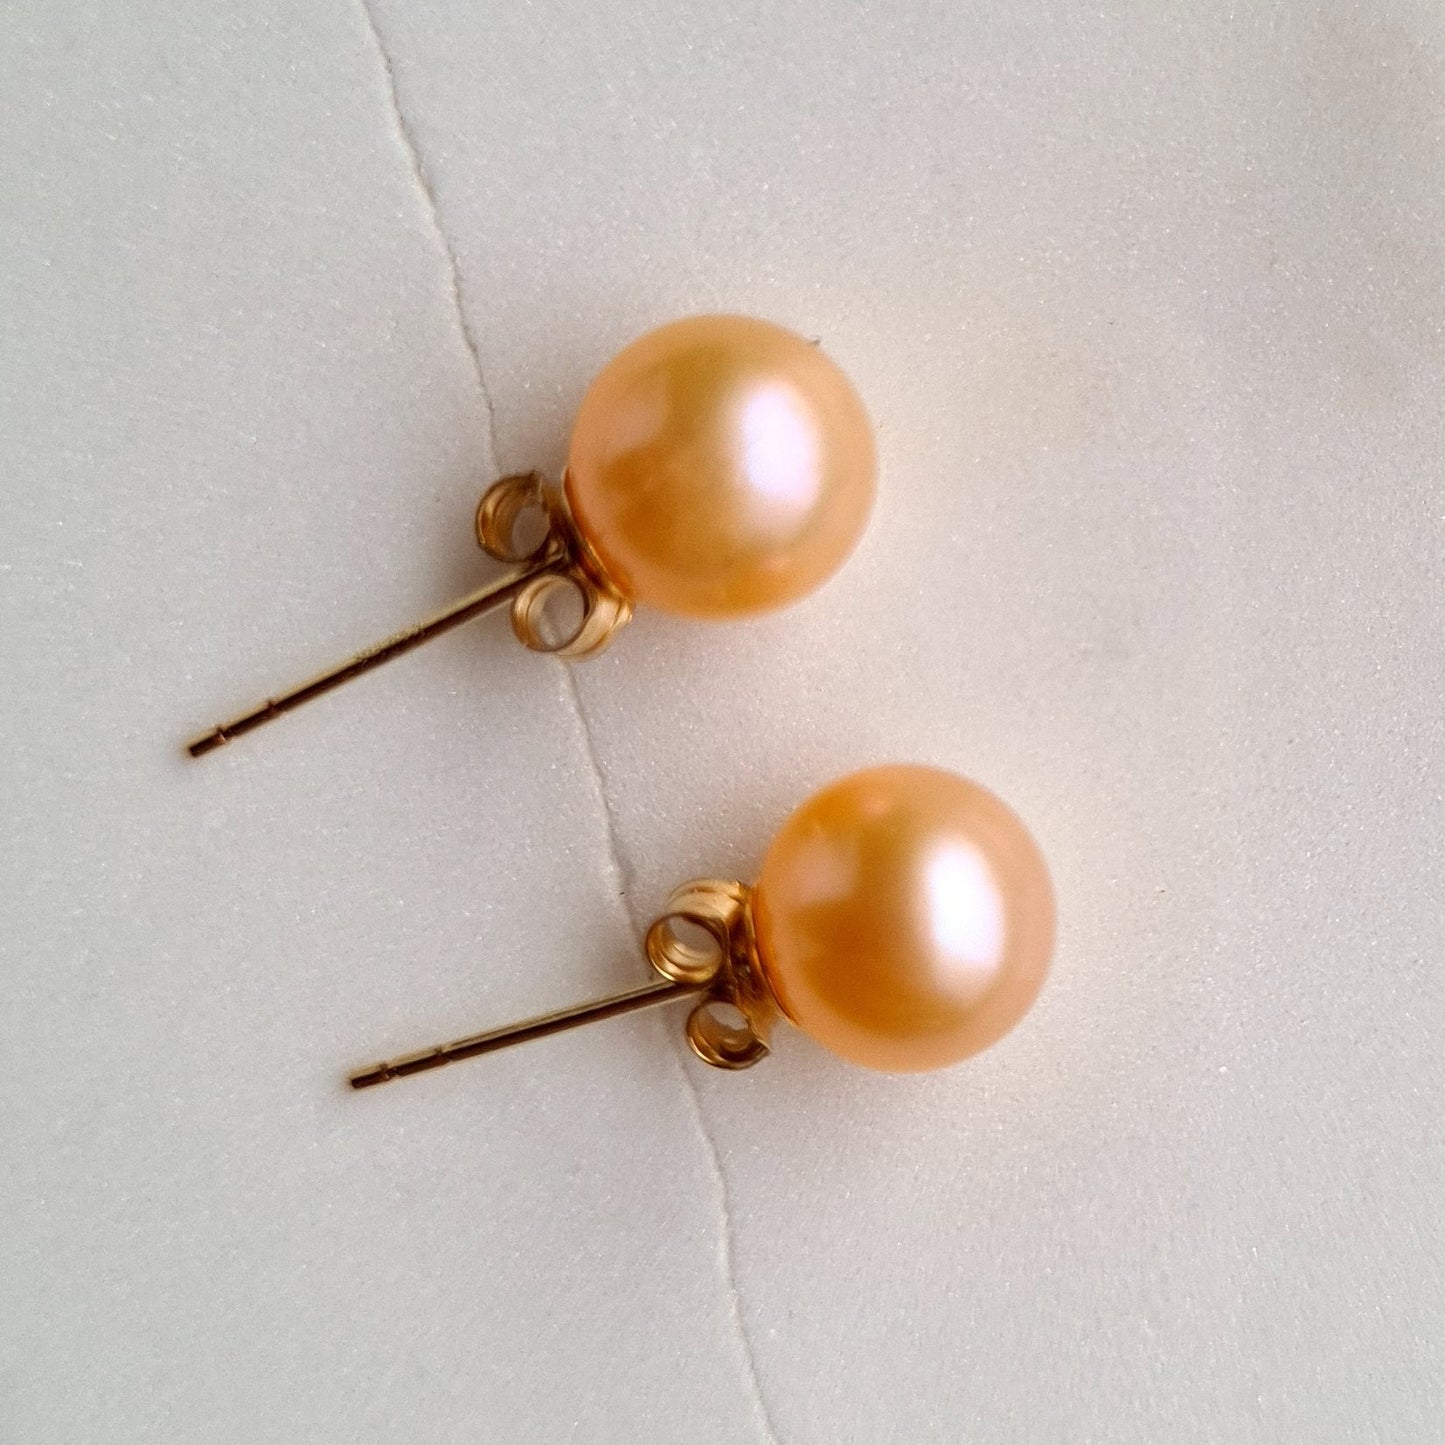 AAA quality 7.5 to 8 mm Almost Round Fresh Water Pearl with Gold filled Ear Stud